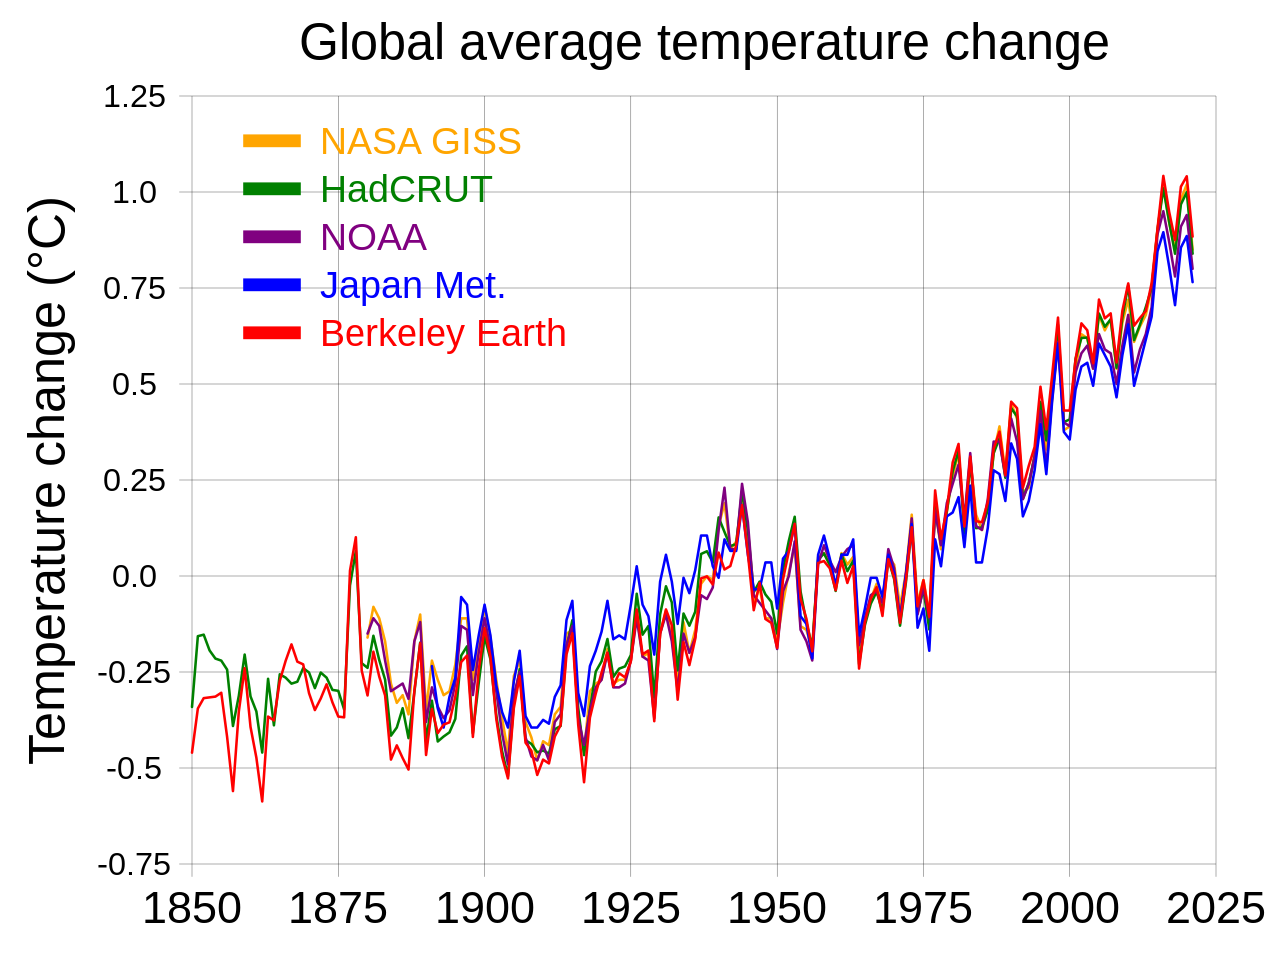 Mean global temperature change since 1850.